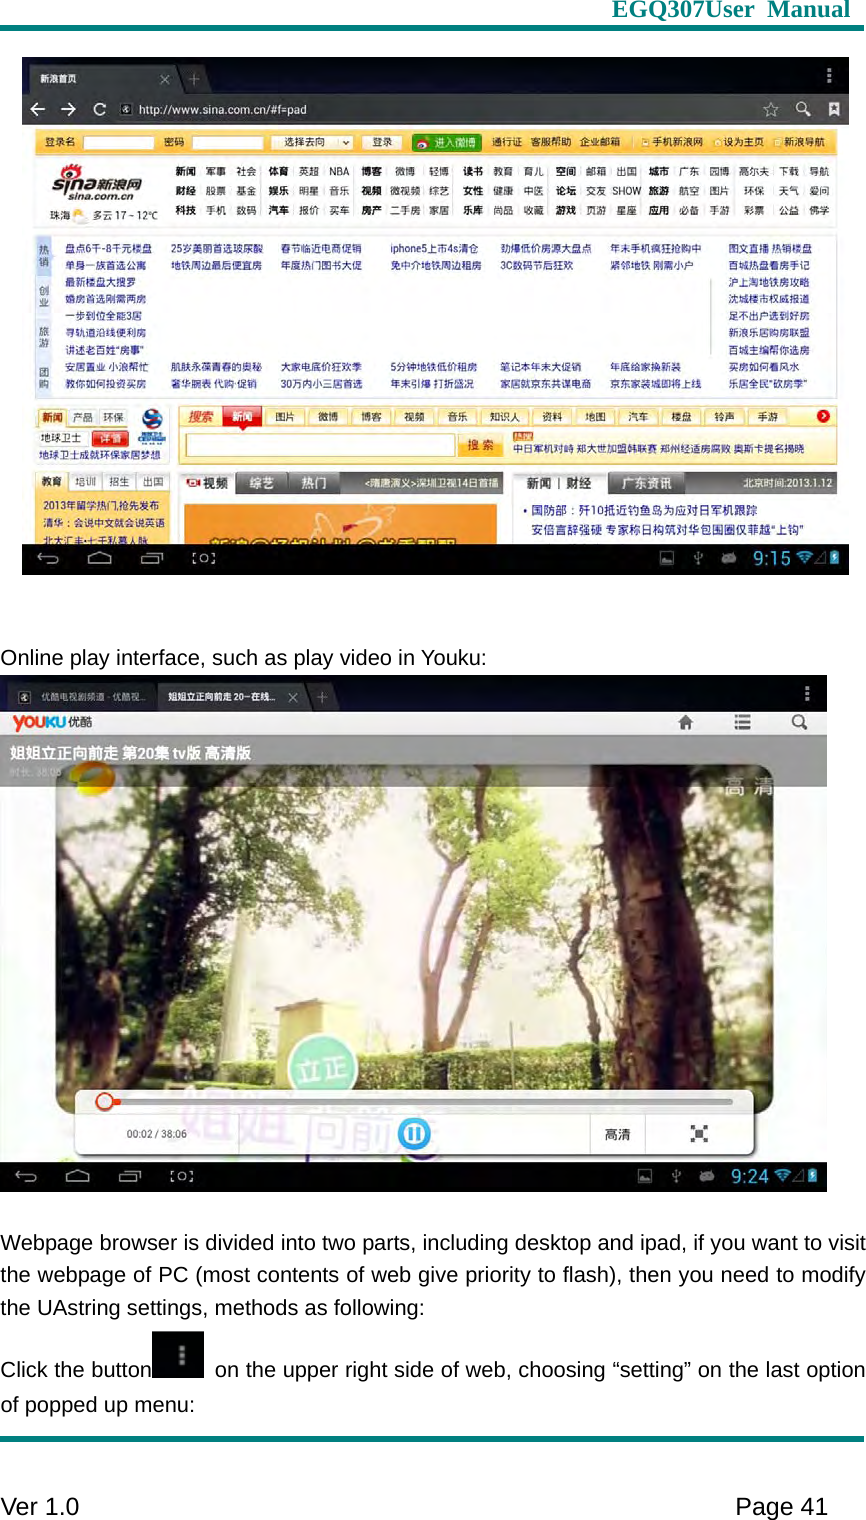                     EGQ307User Manual     Ver 1.0    Page 41     Online play interface, such as play video in Youku:   Webpage browser is divided into two parts, including desktop and ipad, if you want to visit the webpage of PC (most contents of web give priority to flash), then you need to modify the UAstring settings, methods as following: Click the button   on the upper right side of web, choosing “setting” on the last option of popped up menu: 